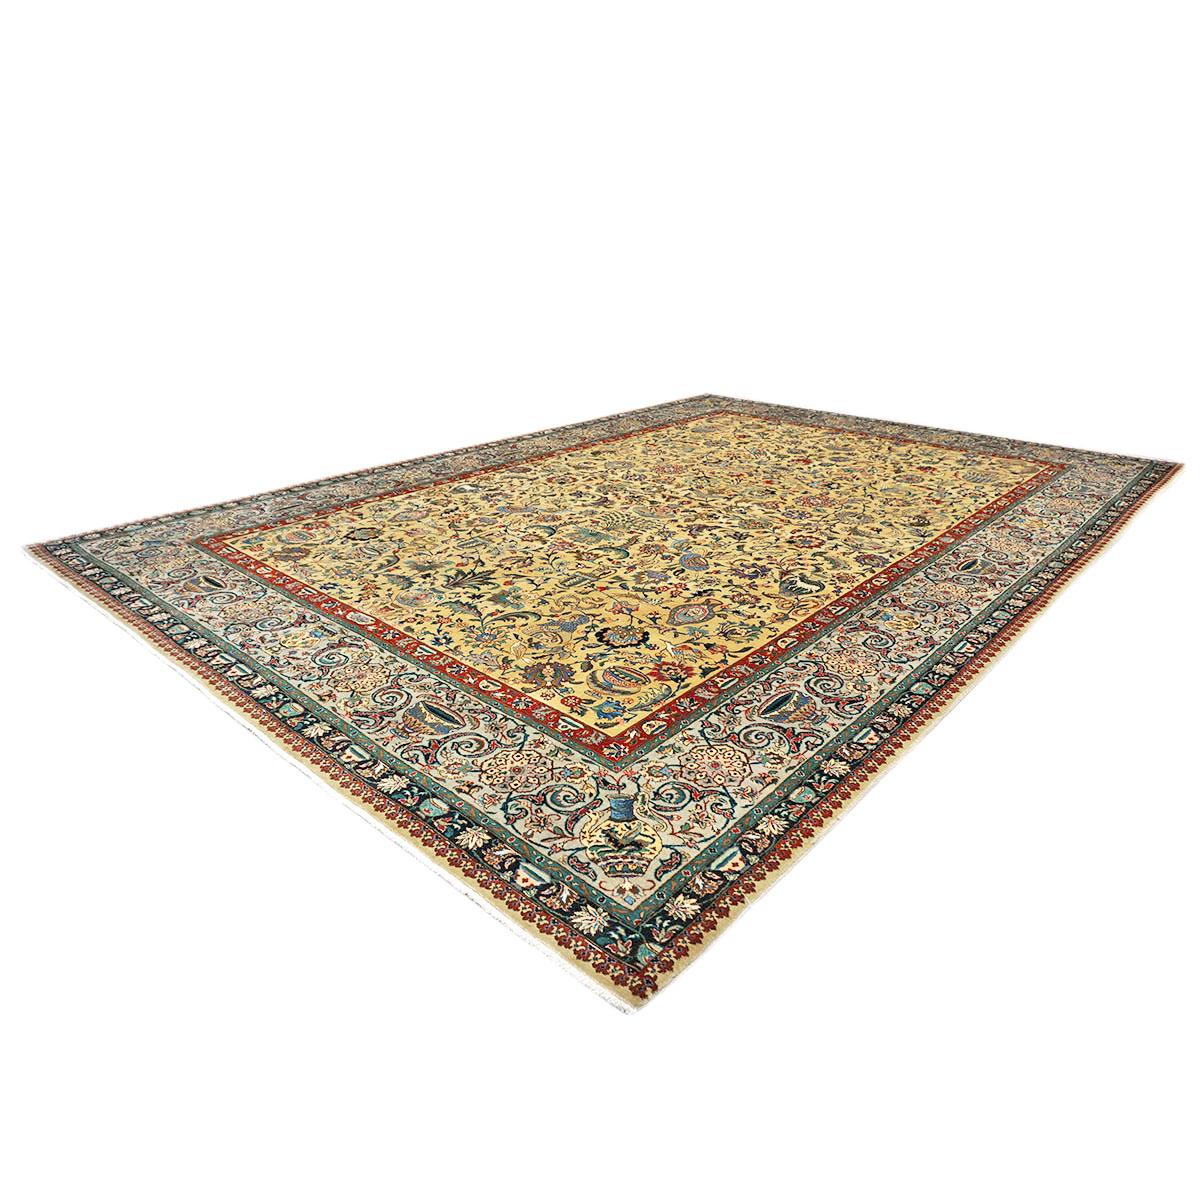 Mid-20th Century Antique Persian Tabriz 10x14 Gold, Light Taupe, & Red Handmade Area Rug For Sale